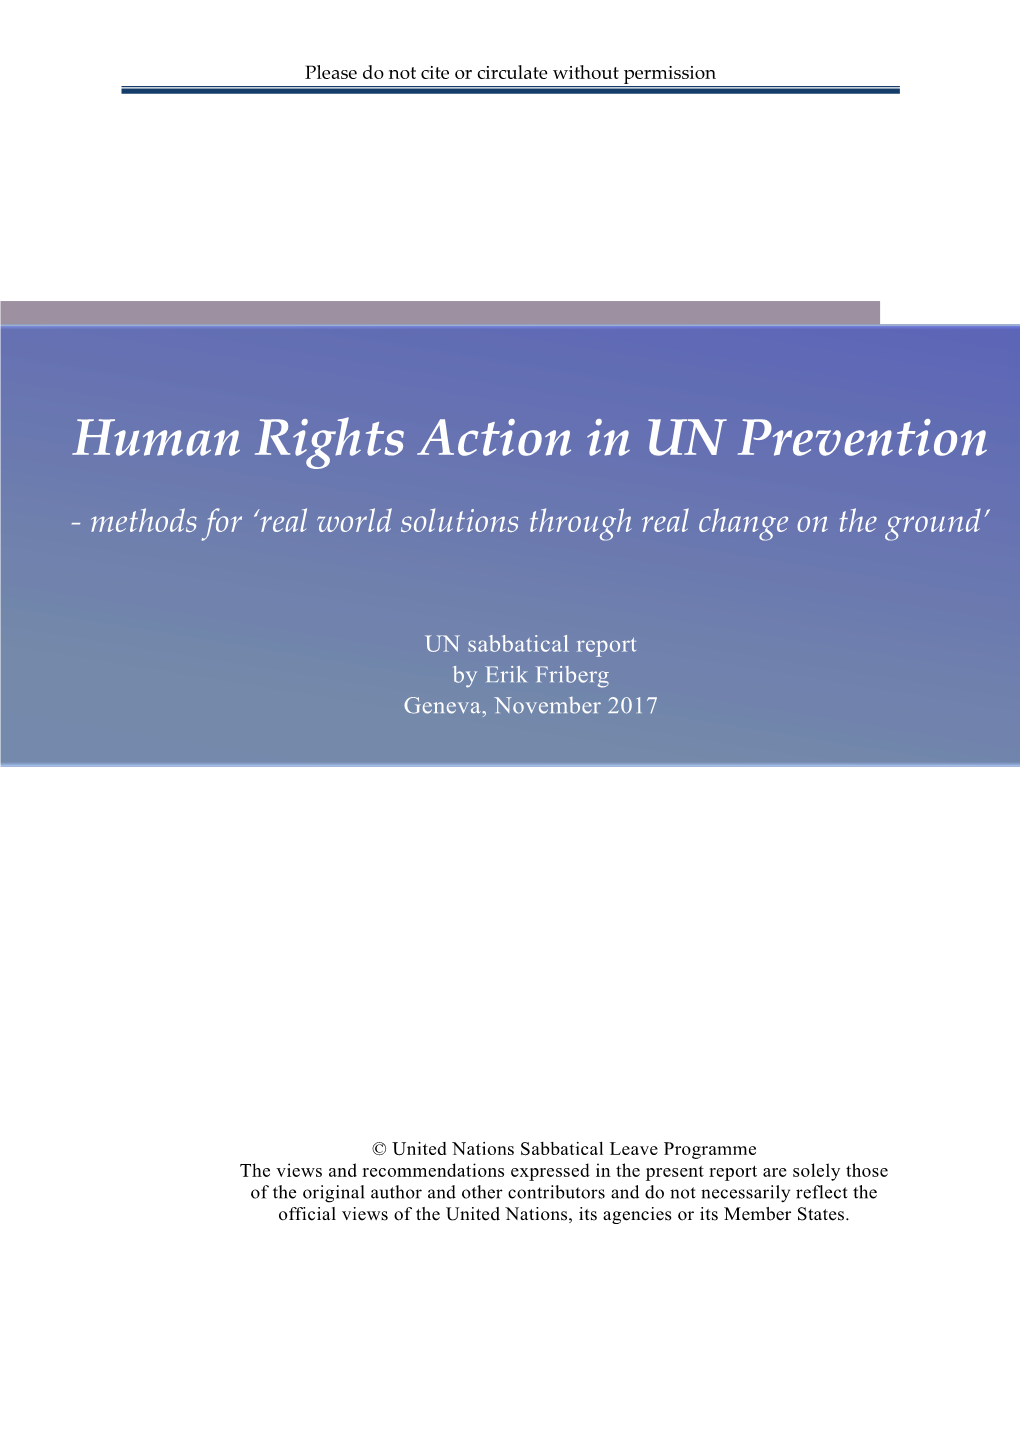 Human Rights Action in UN Prevention.Pdf